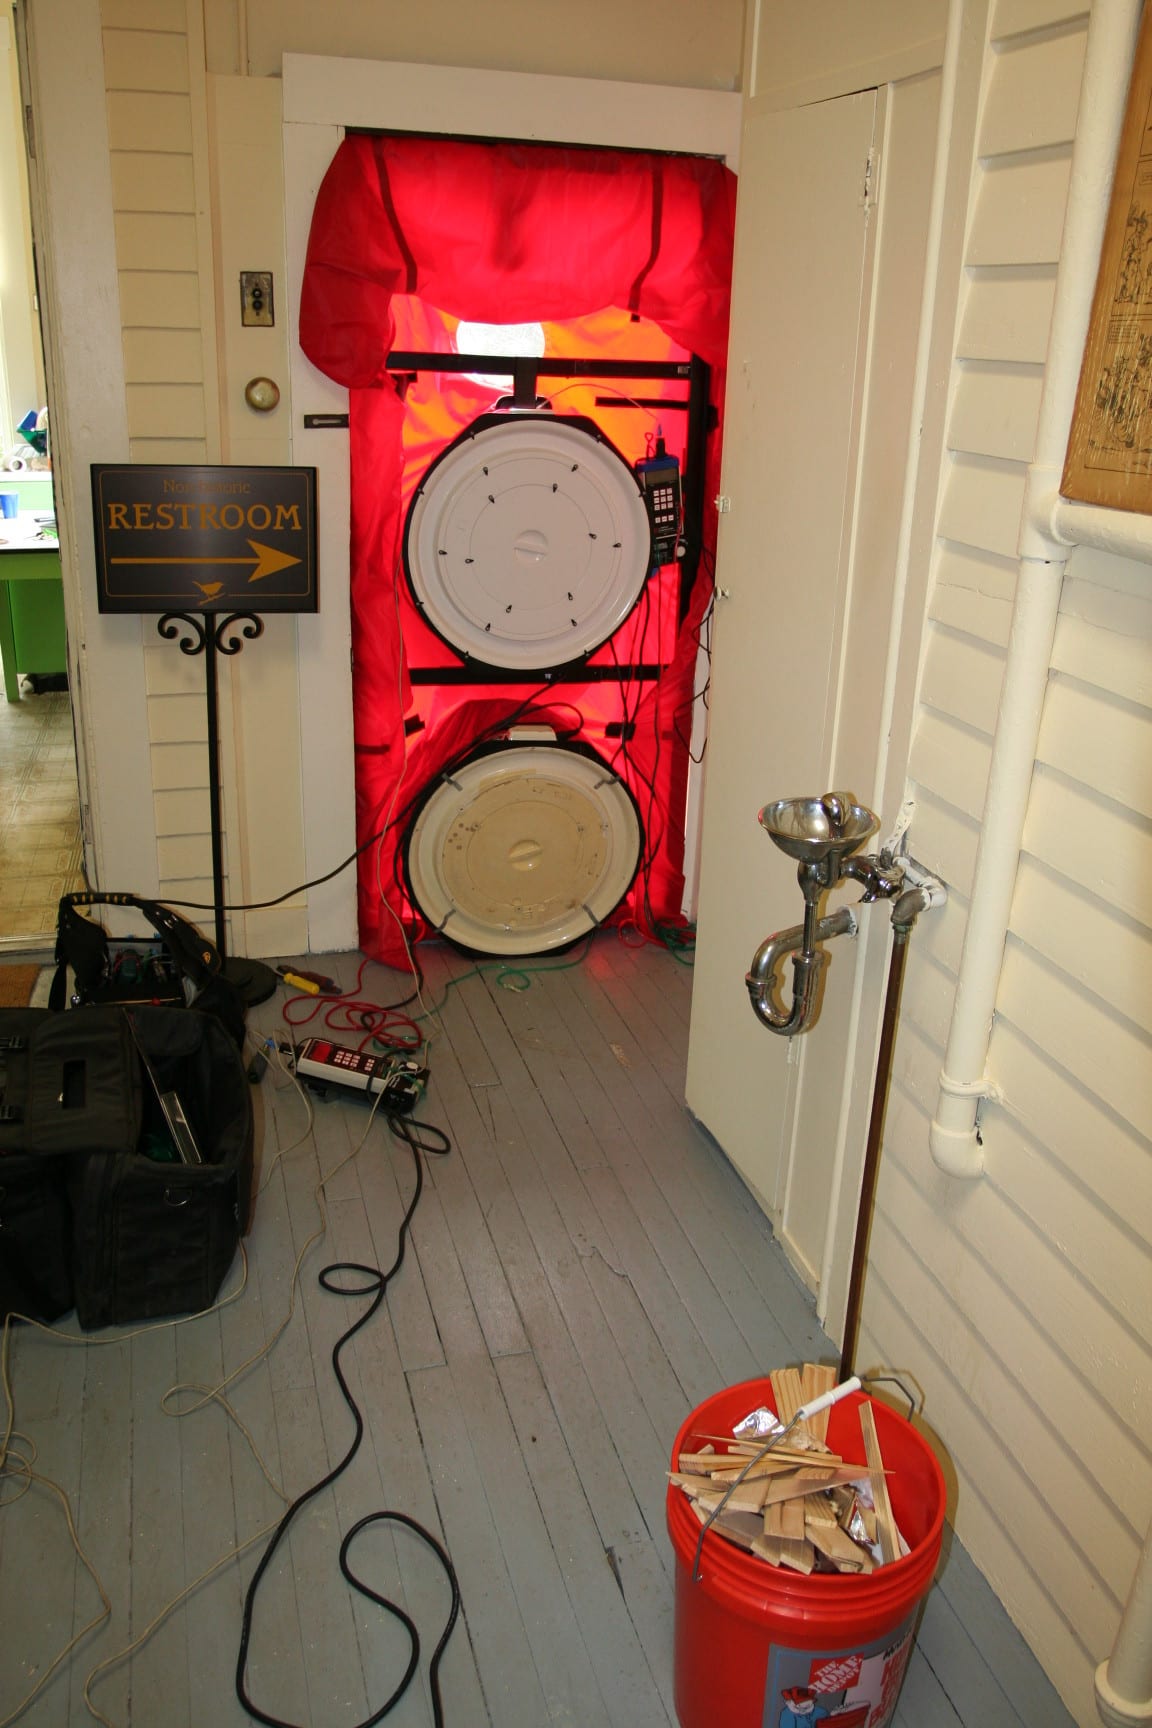 The Wren's Nest House Museum and Educational resource center received a blower door air leakage assessment as part of a full energy assessment.